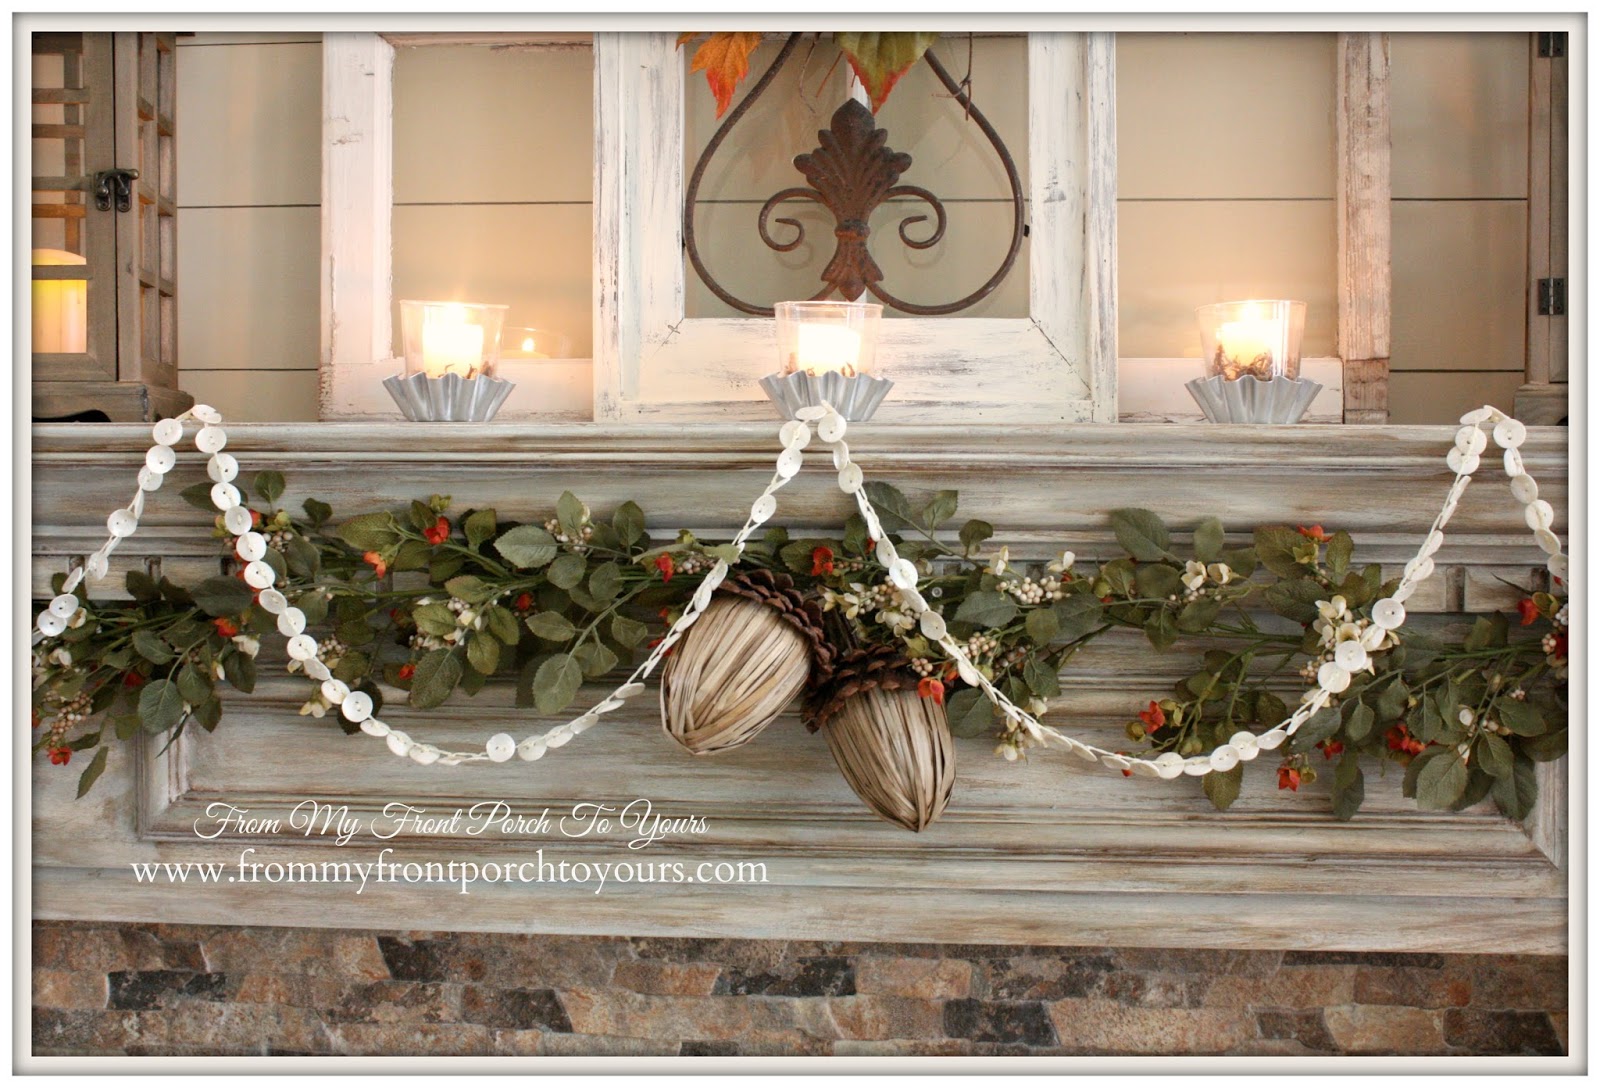 From My Front Porch To Yours- French Farmhouse Fall Mantel 2014